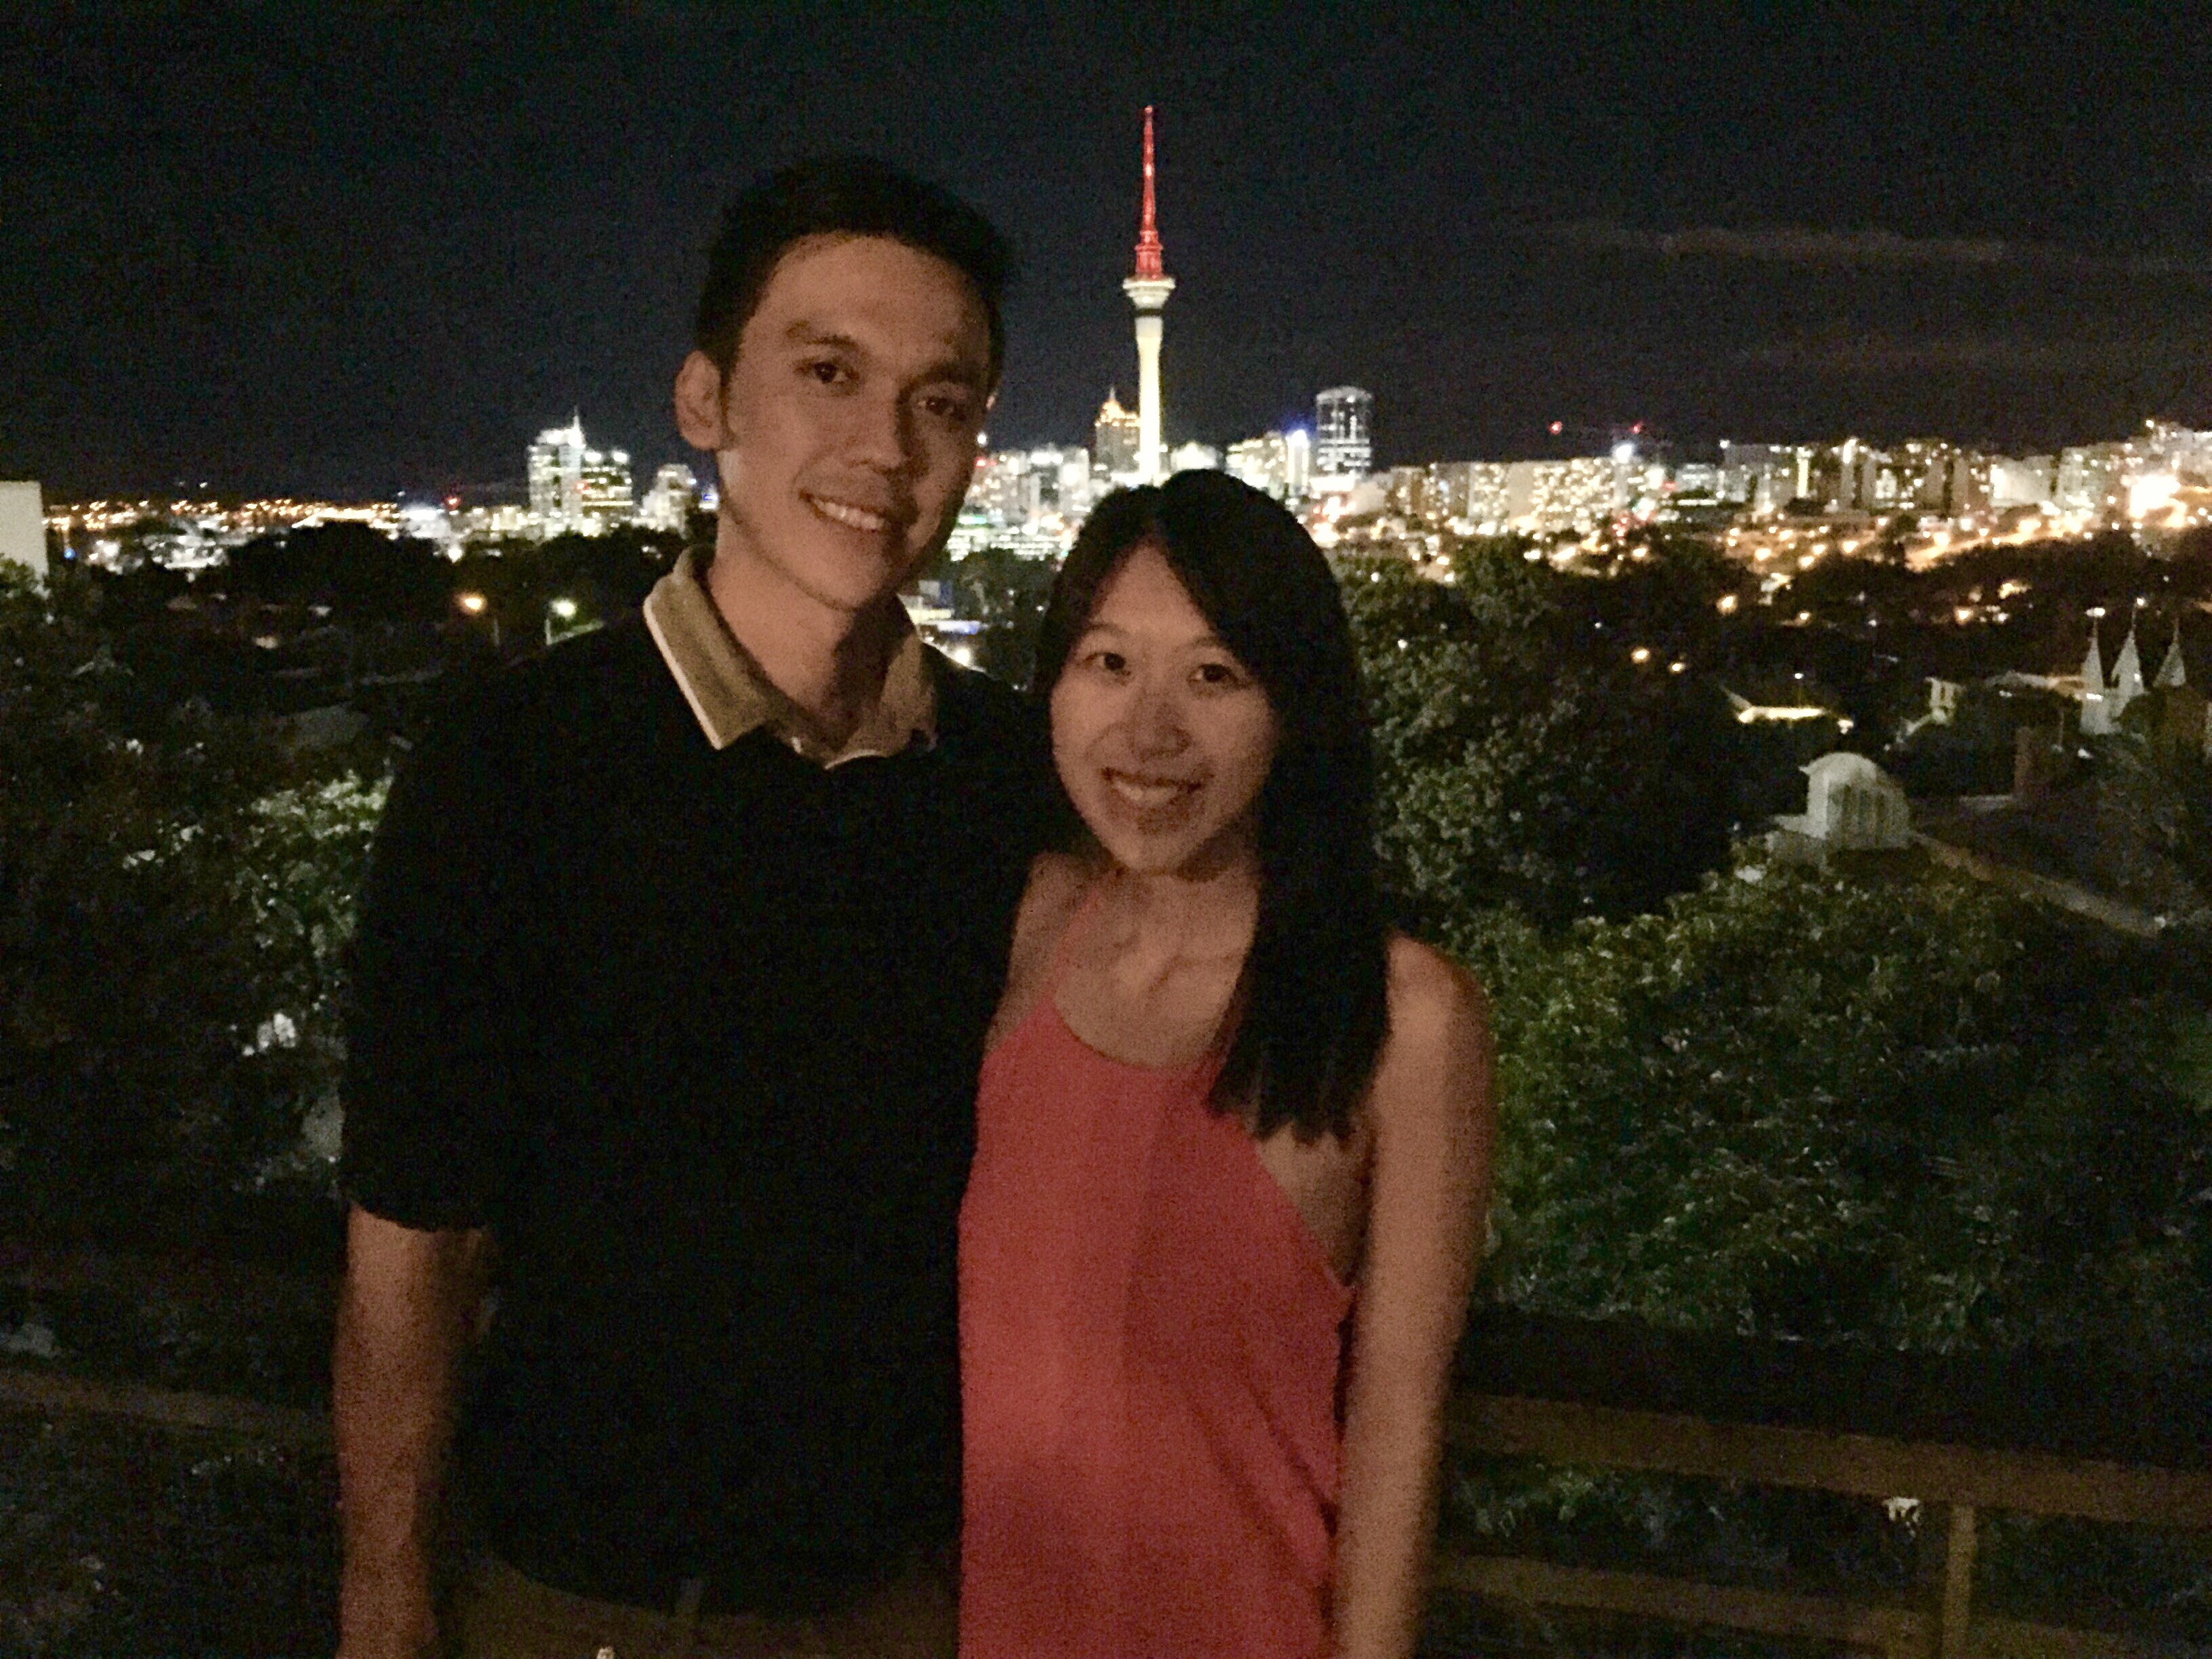 Dinner with the best (view and company). – firstofthebest